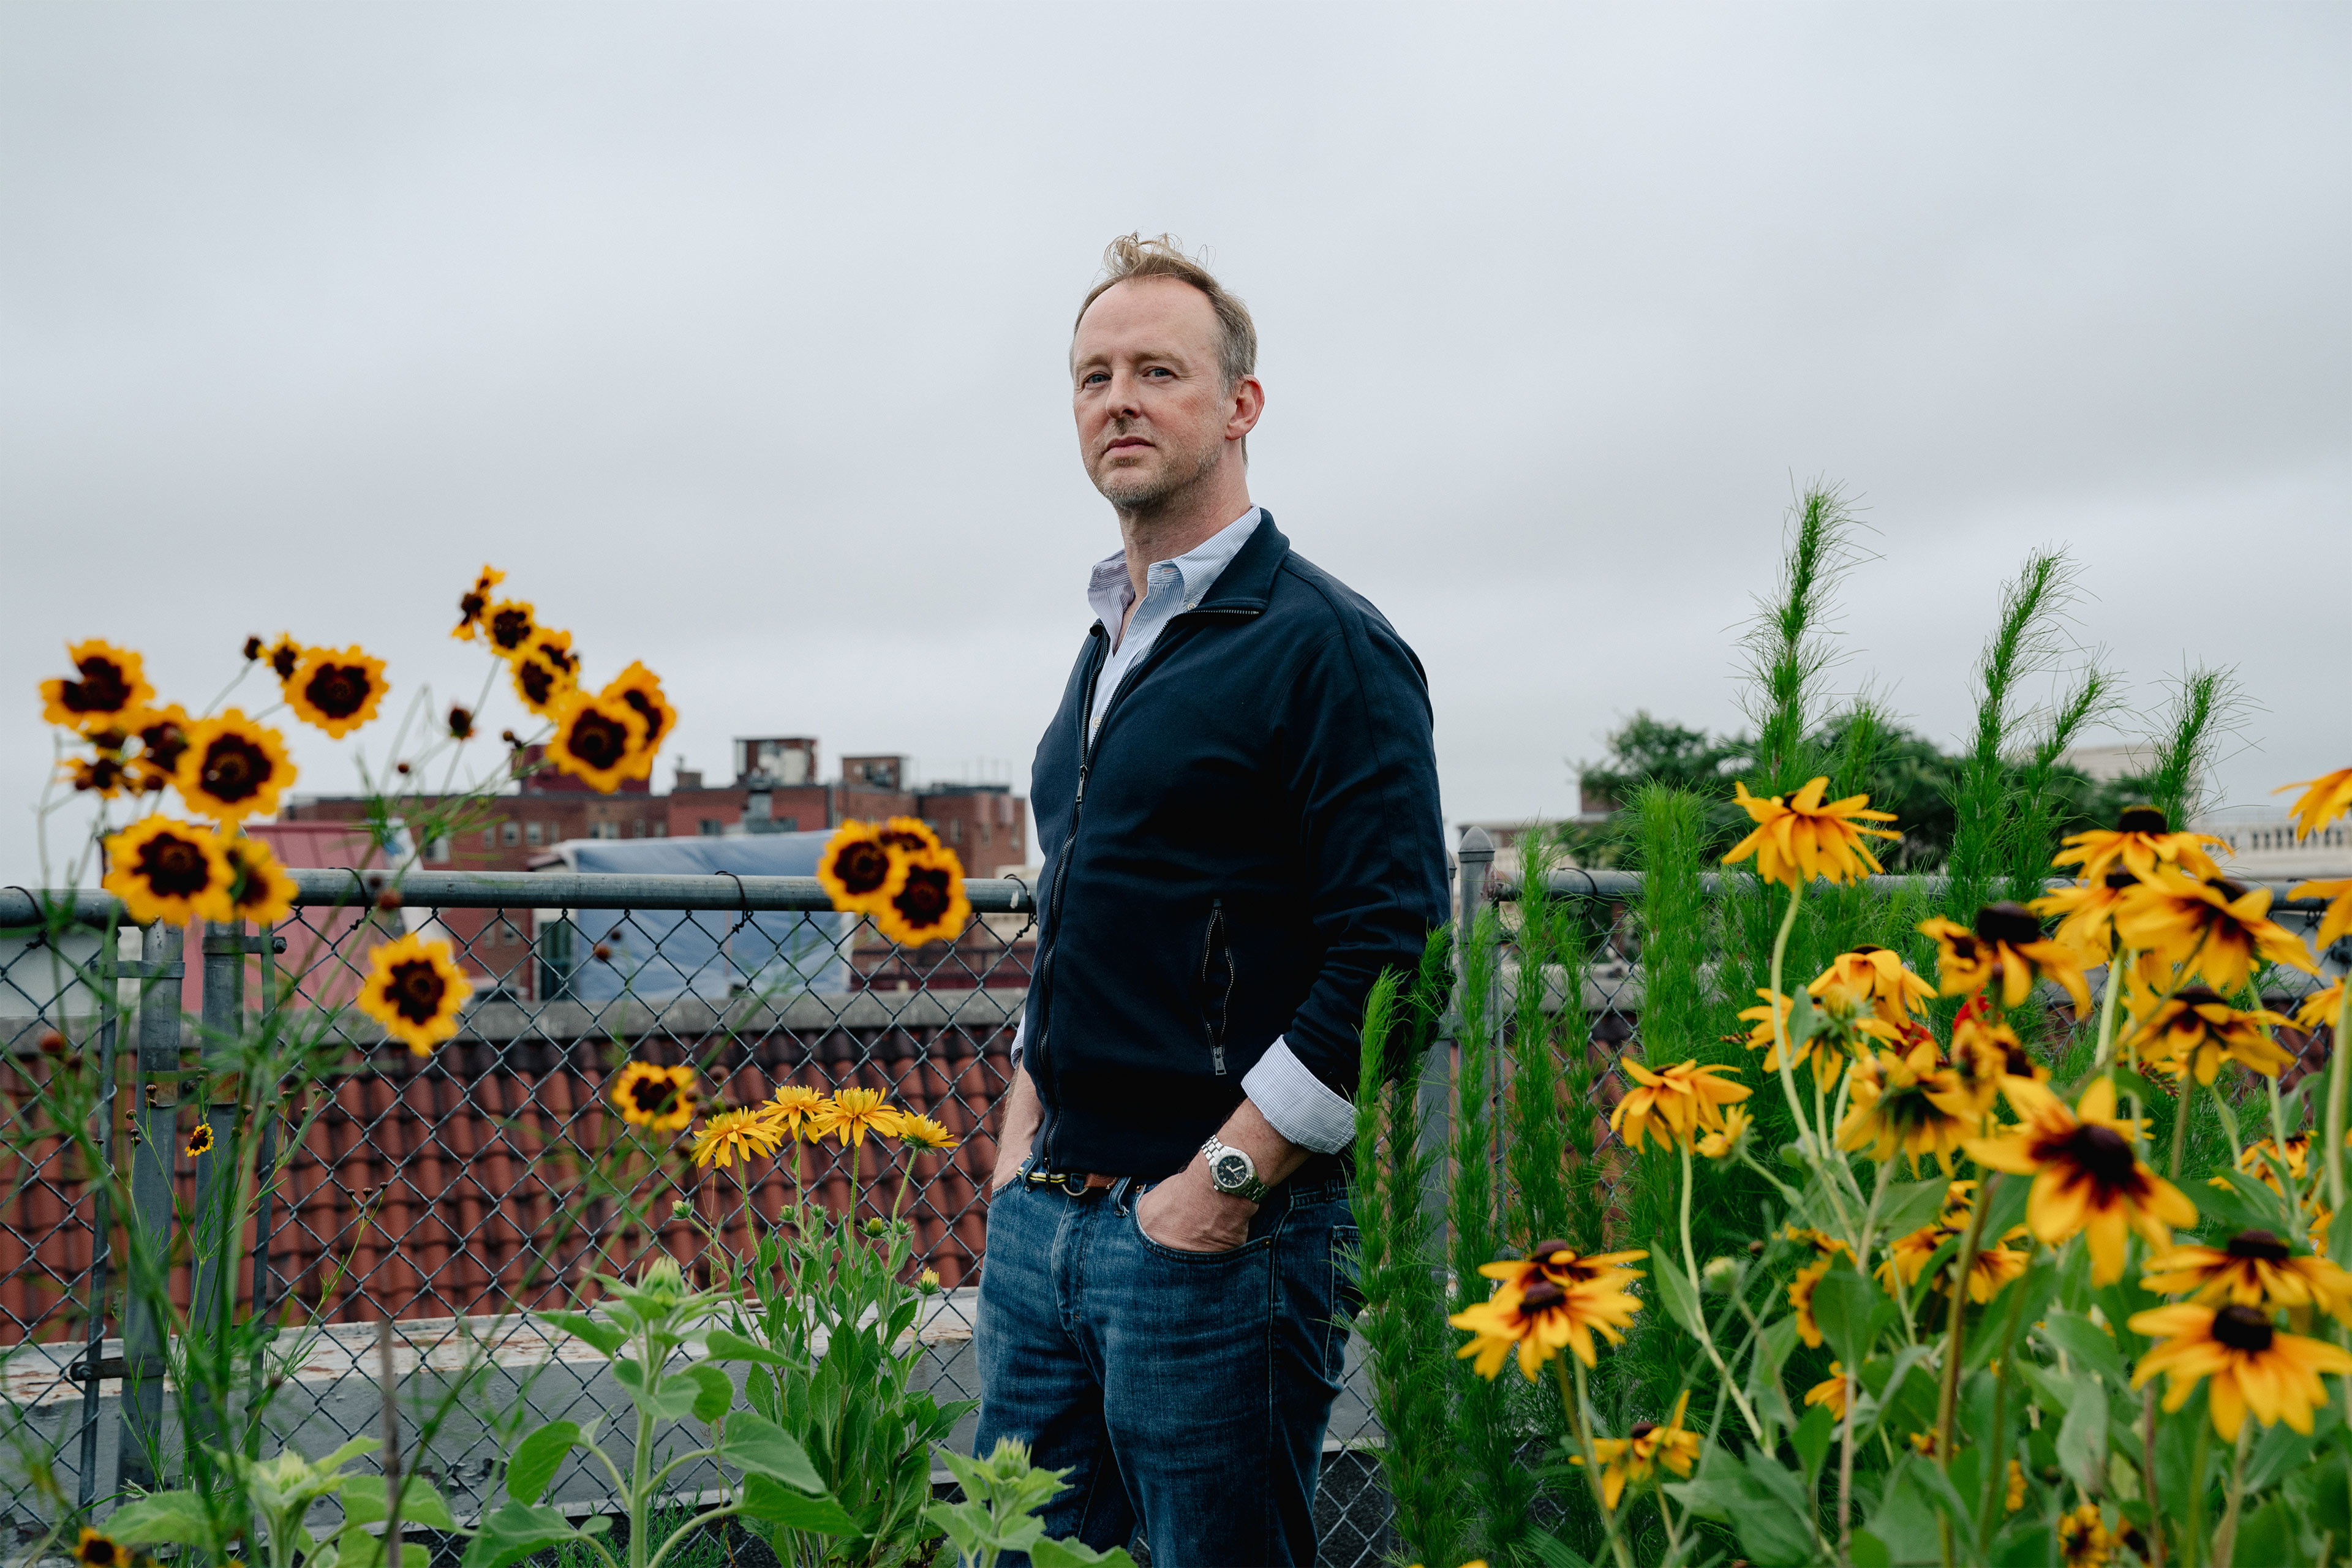 A photo of a man posing for a photo surrounded by black-eyed Susan flowers.